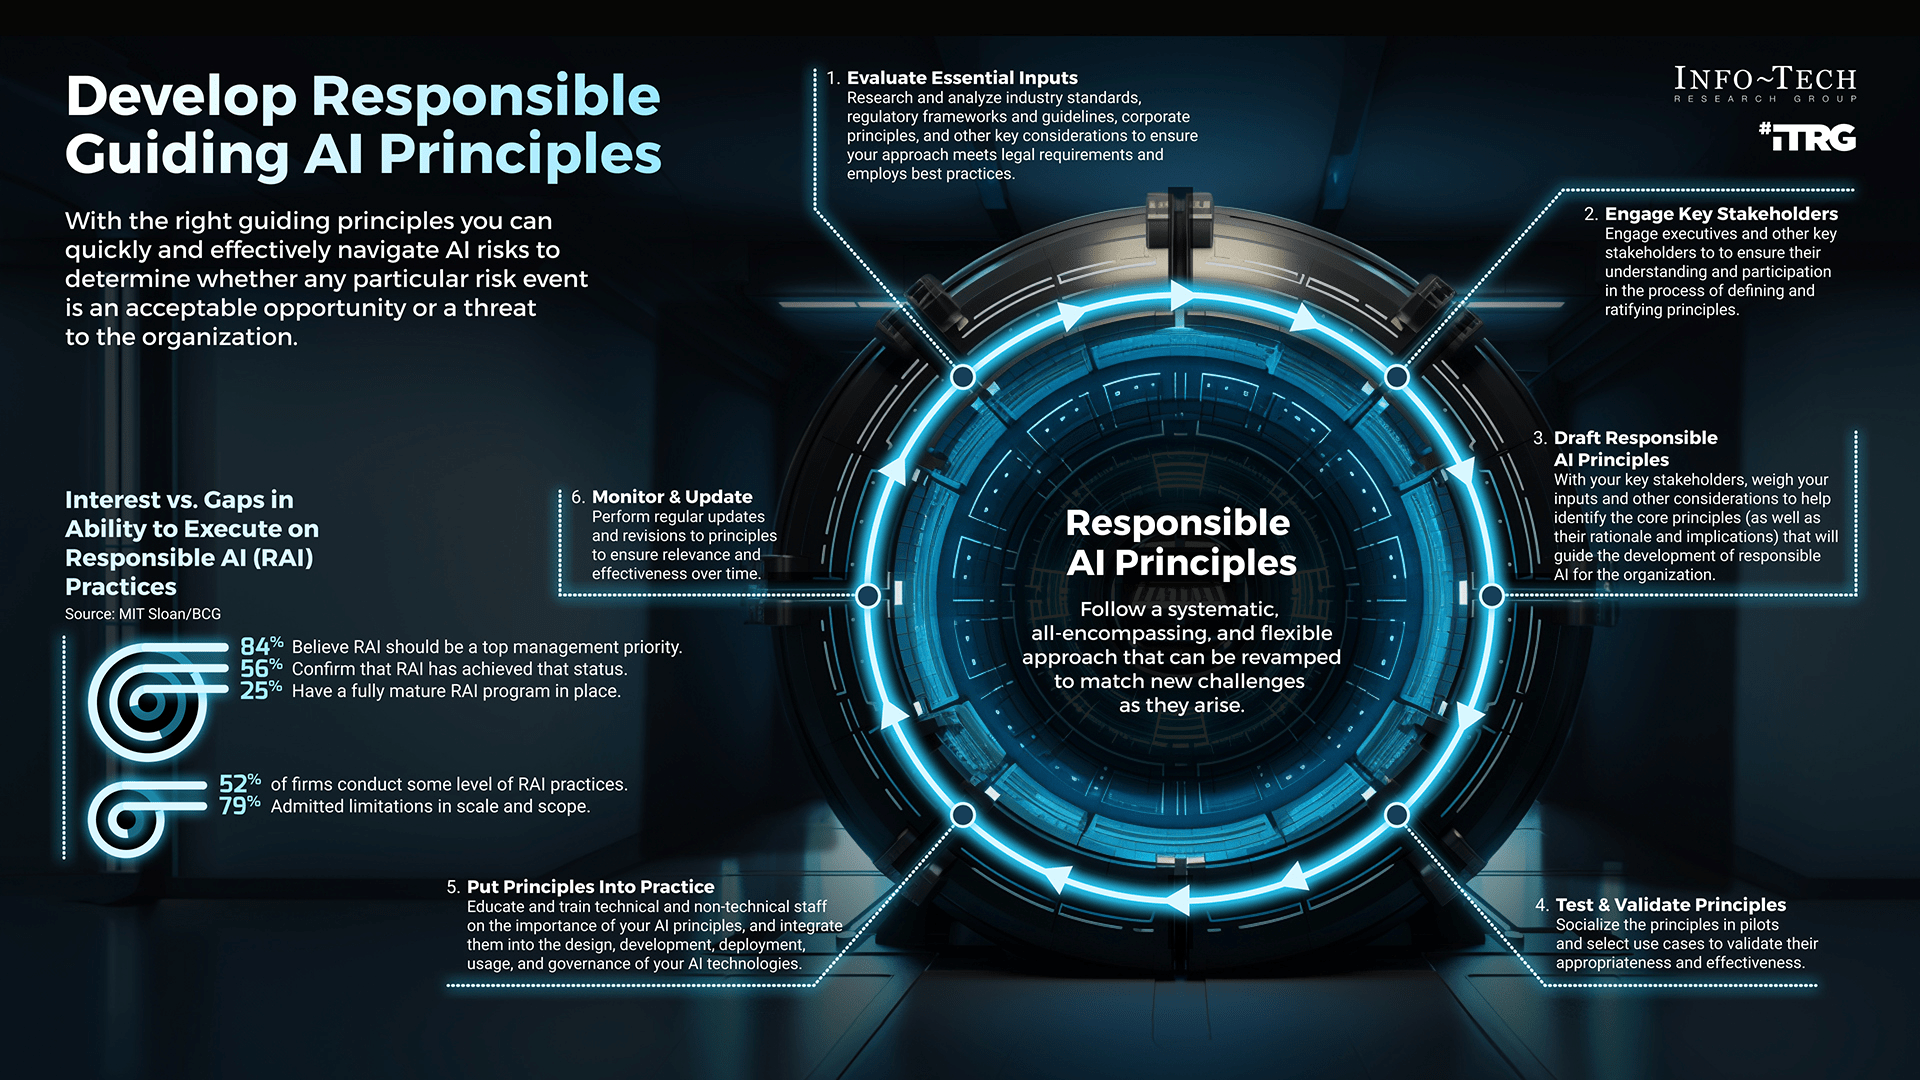 An infographic titled 'Develop Responsible Guiding AI Principles' featuring a cycle labelled 'Responsible AI Principles'. The steps, in order, are '1. Evaluate Essential Inputs', '2. Engage Key Stakeholders', '3. Draft Responsible AI Principles', '4. Test & Validate Principles', '5. Put Principles Into Practice', '6. Monitor & Update'.